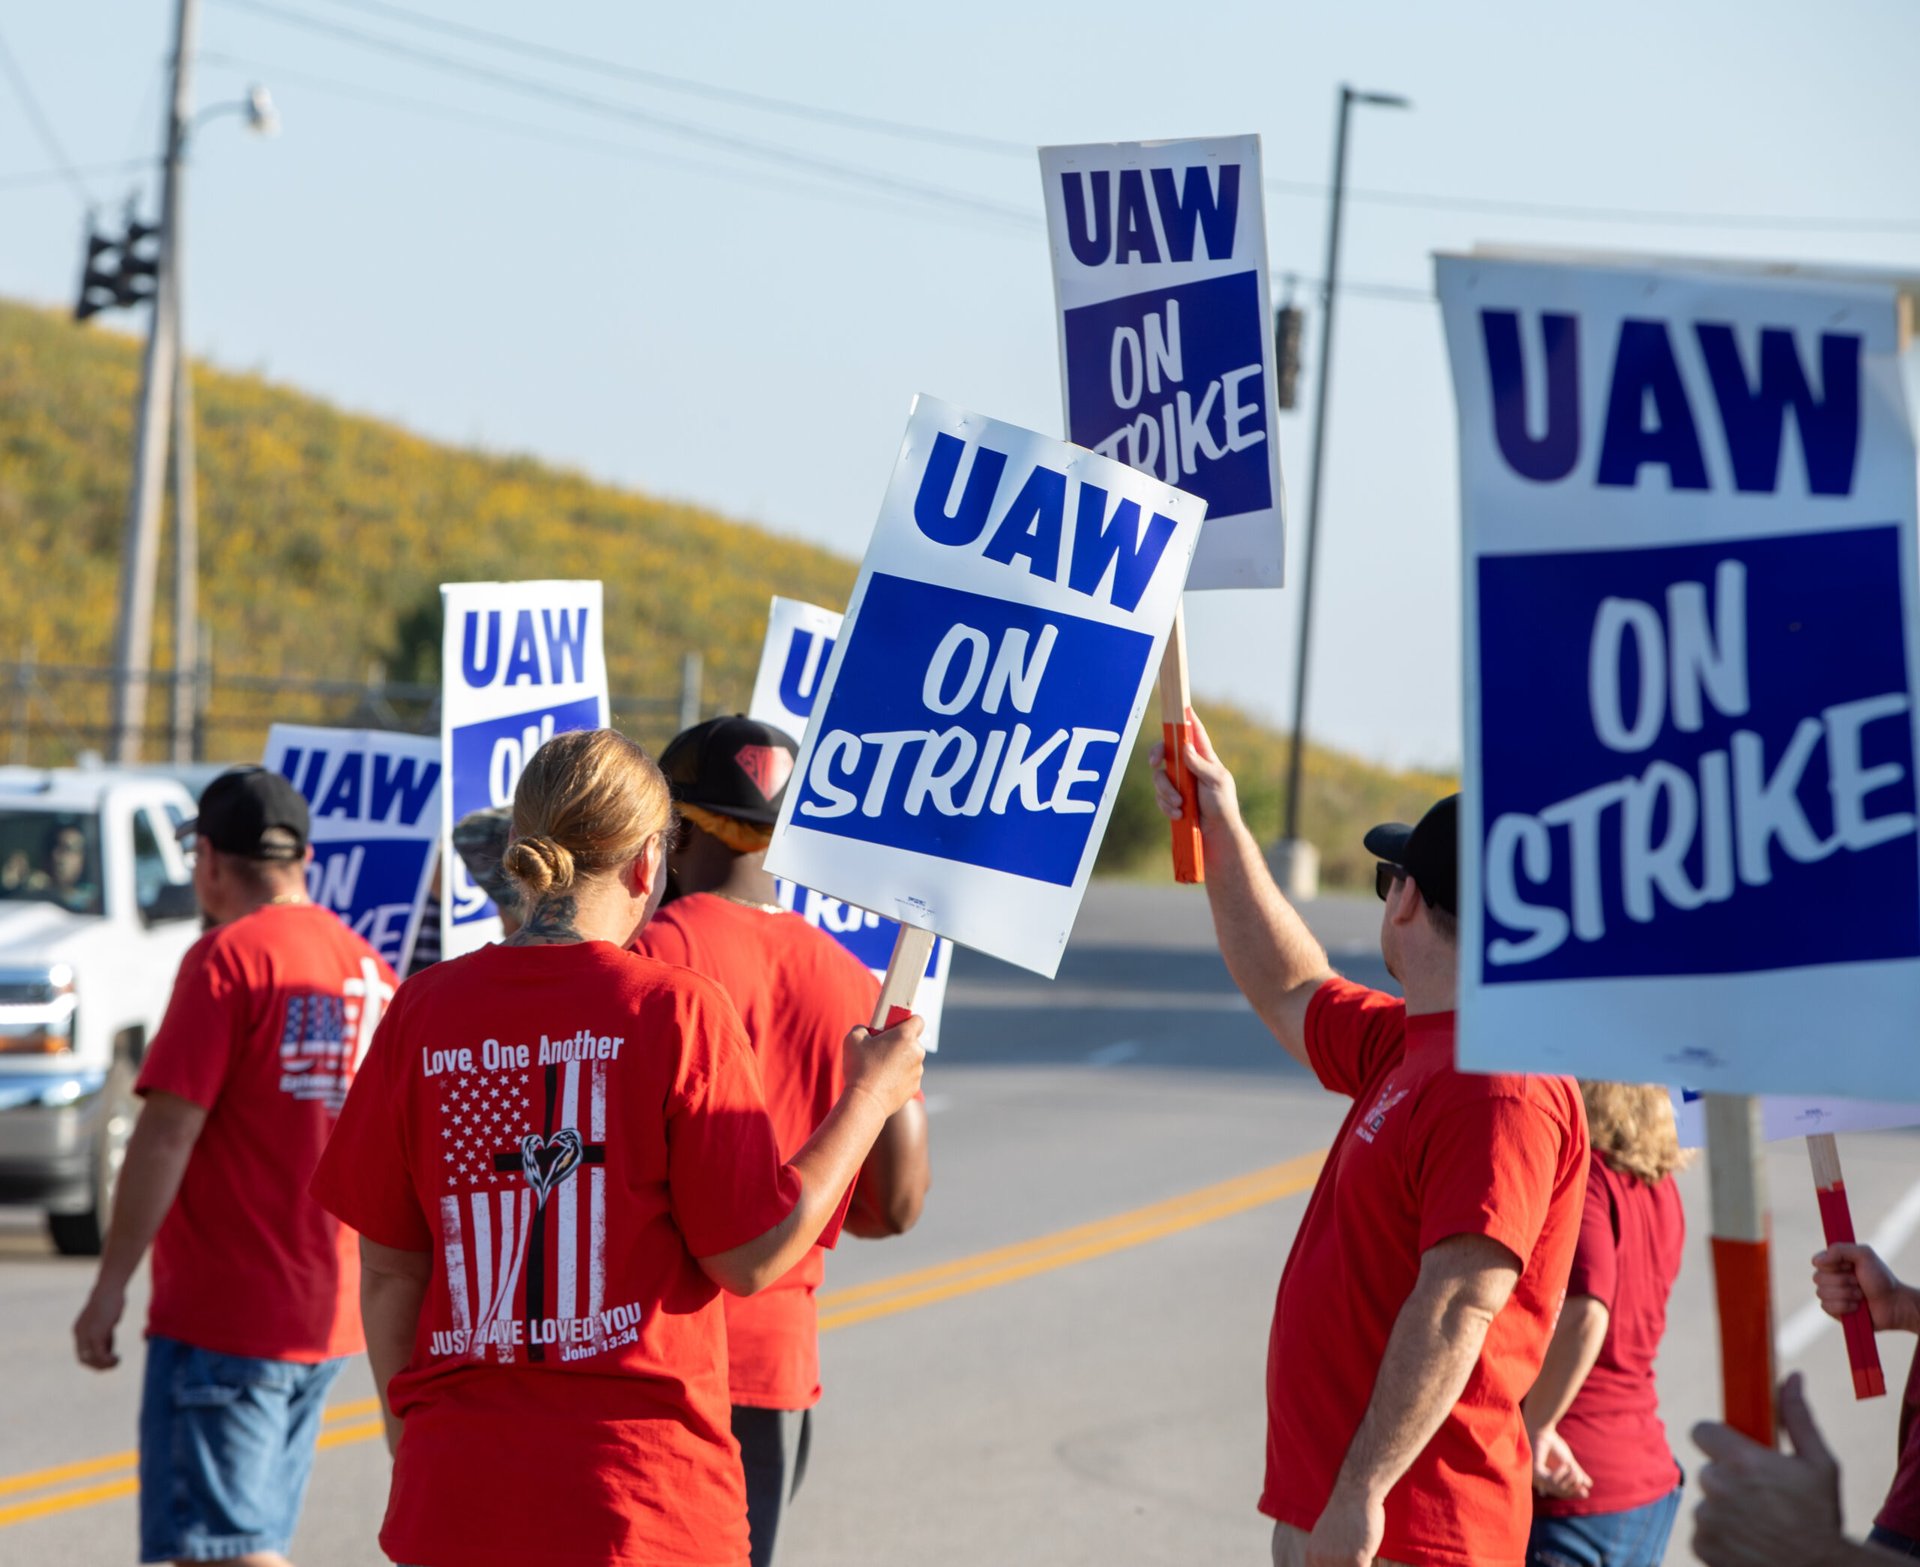 United Auto Workers Union or UAW on strike